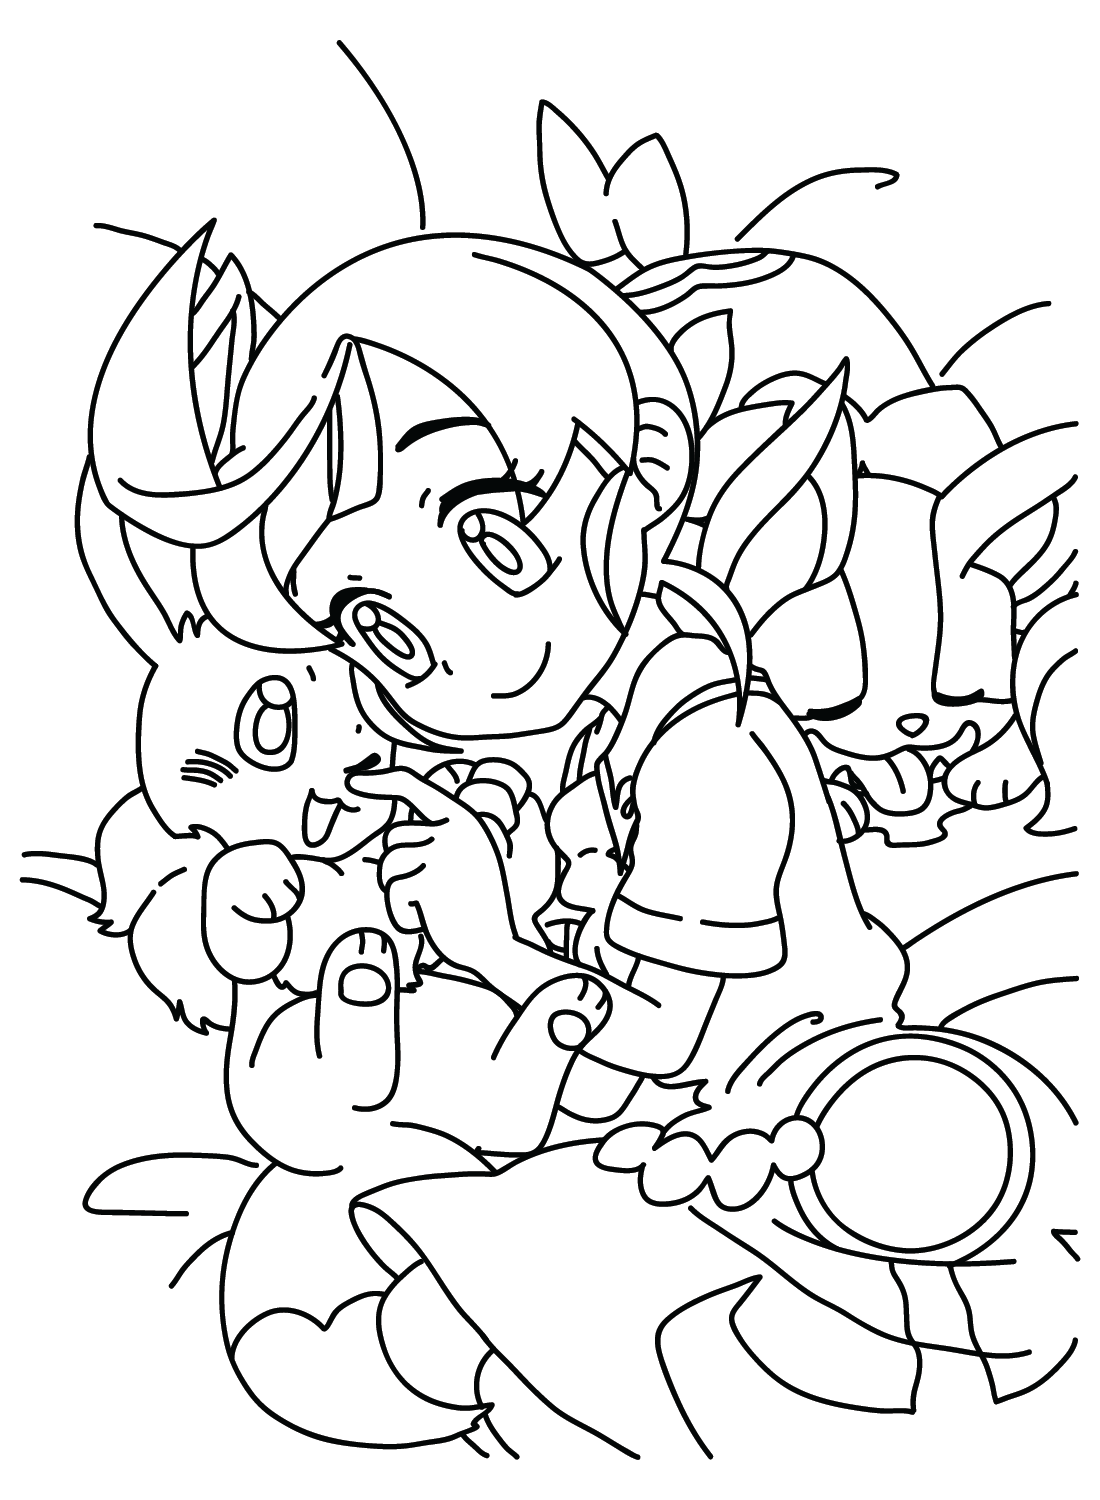 Chloe Cerise, Yamper and Eevee Pokemon Coloring Page from Eevee